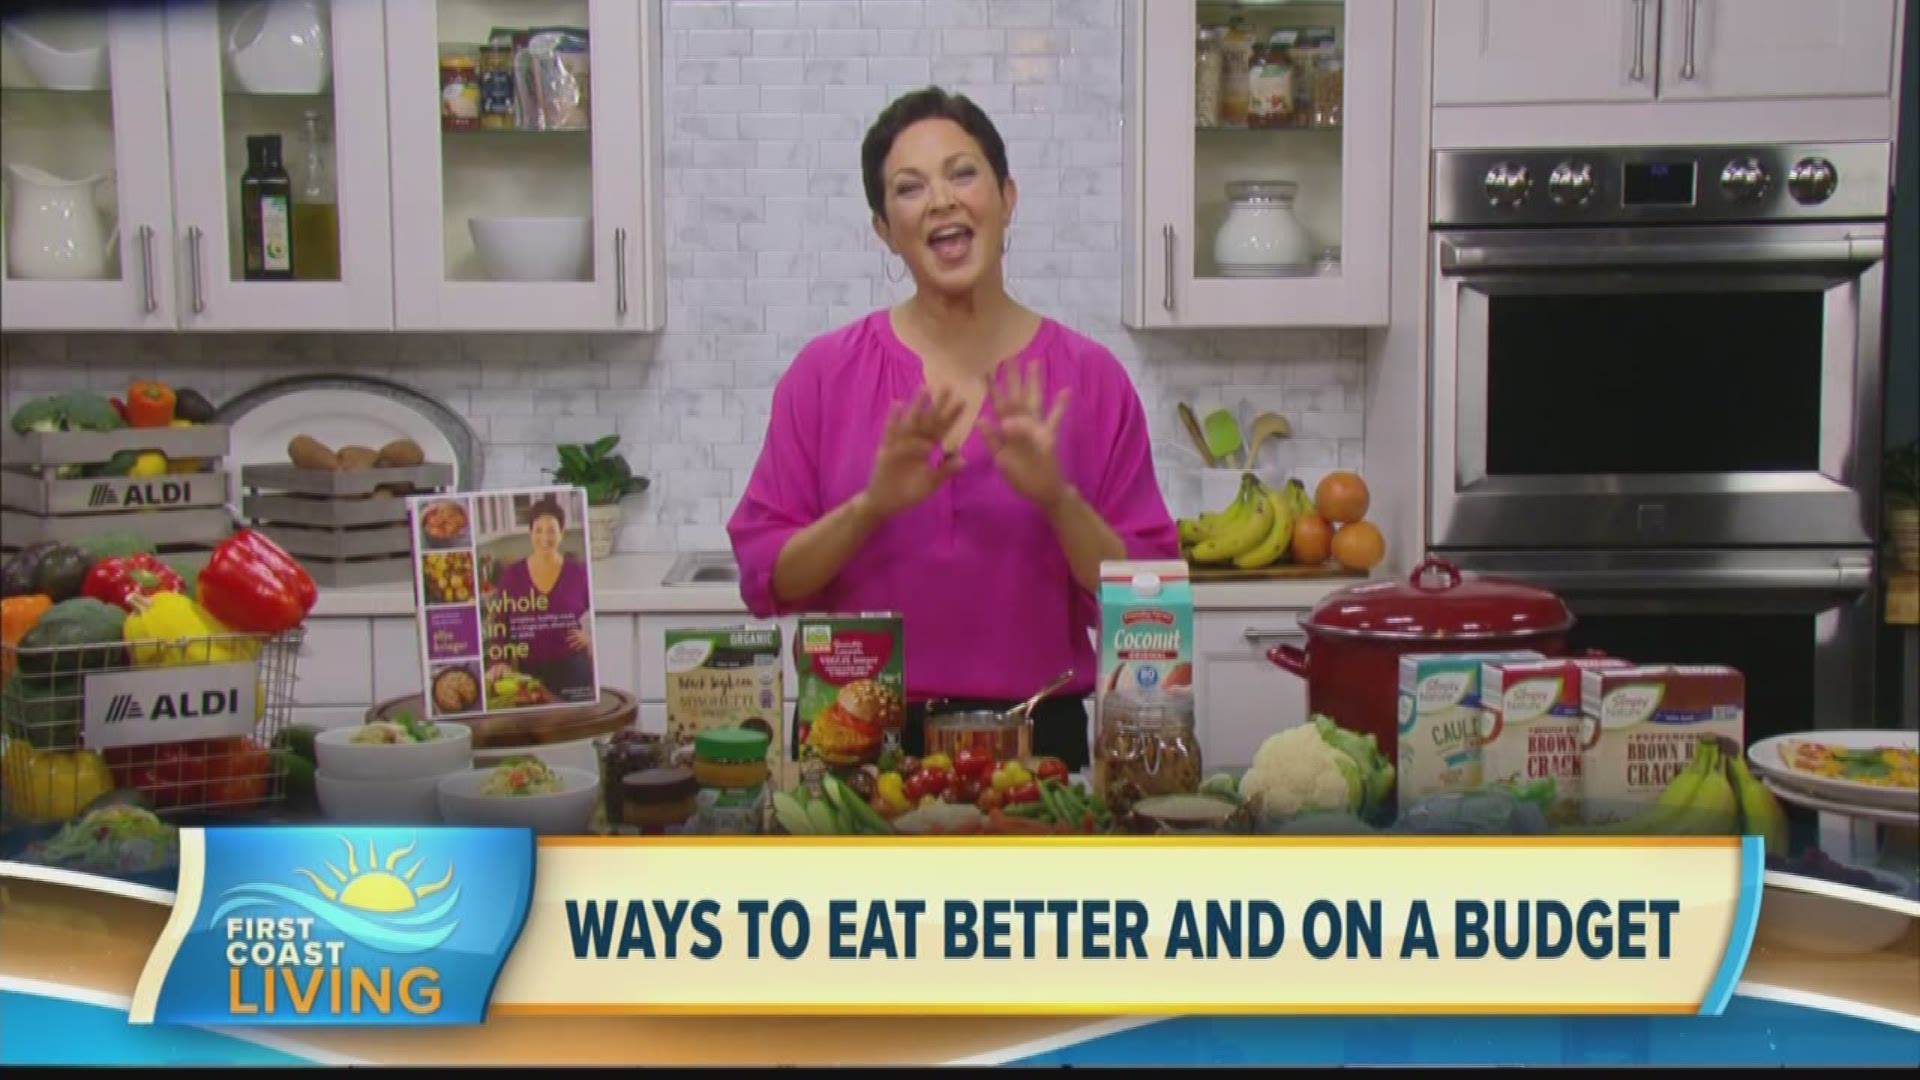 Renowned nutritionist guides viewers through the path of eating better on a budget.